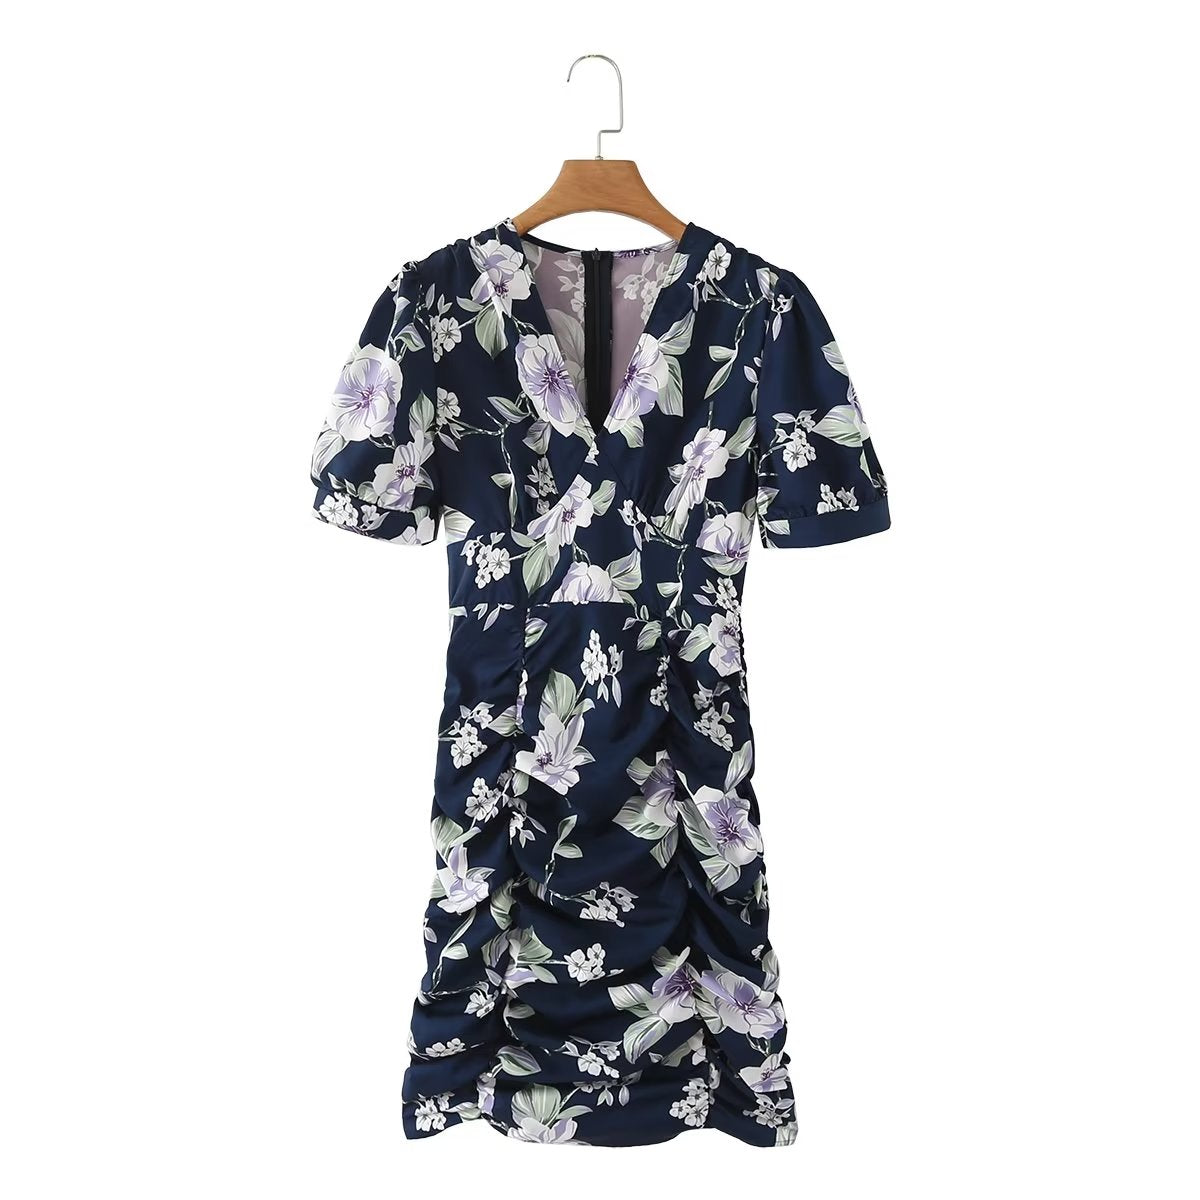 Dress Autumn Rose Silhouette Printed Lace up Shirt Dress